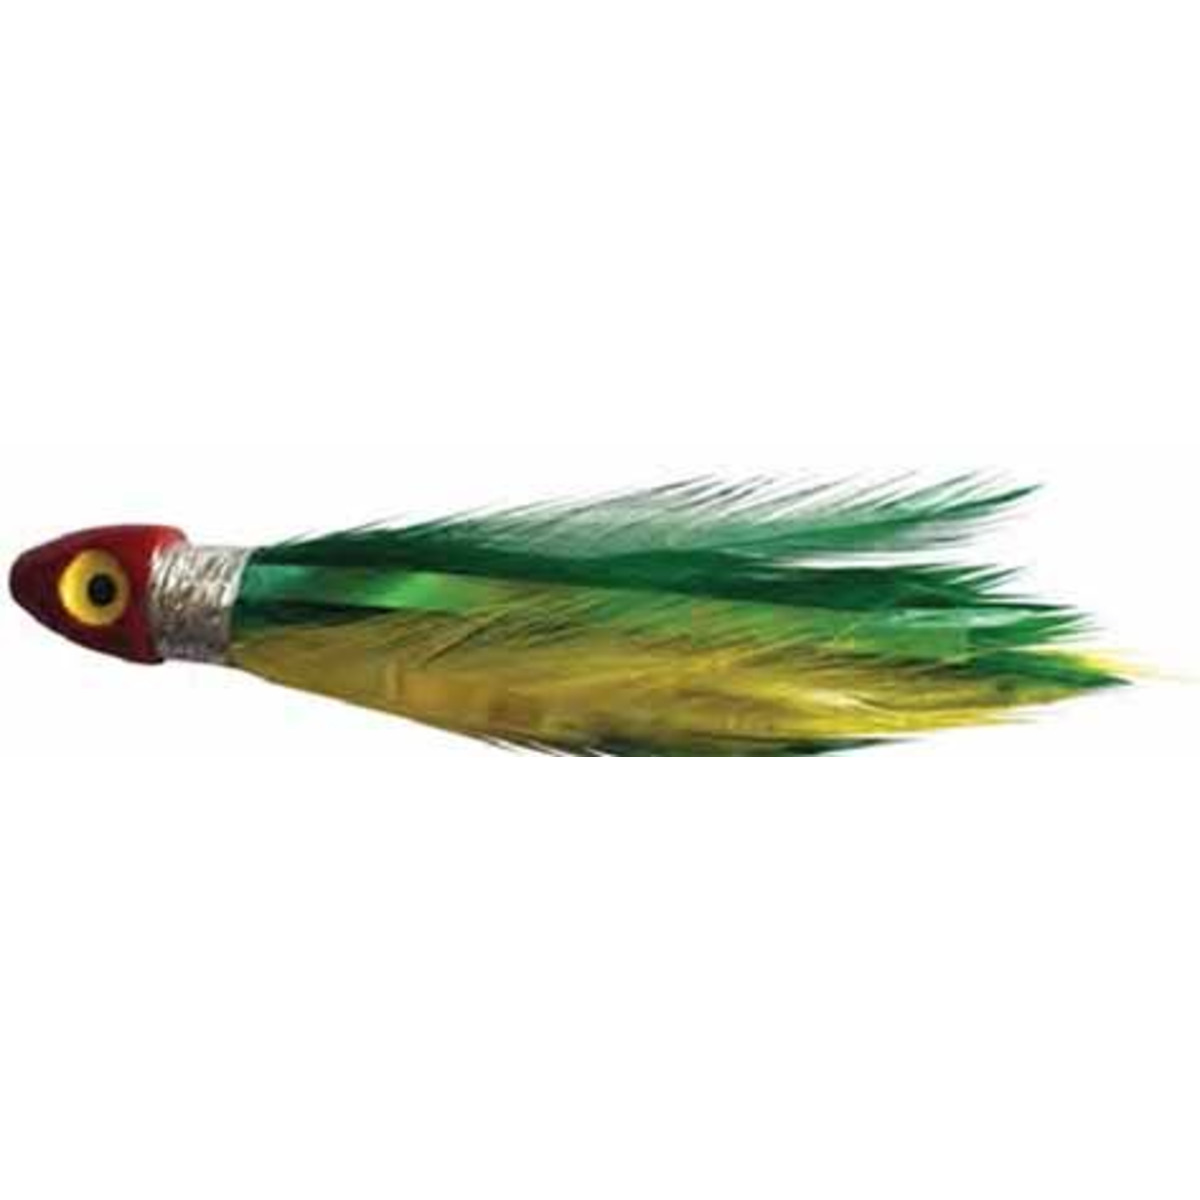 H2o Pro Feather Jet - Yellow Green - 19 g - 8.5 cm